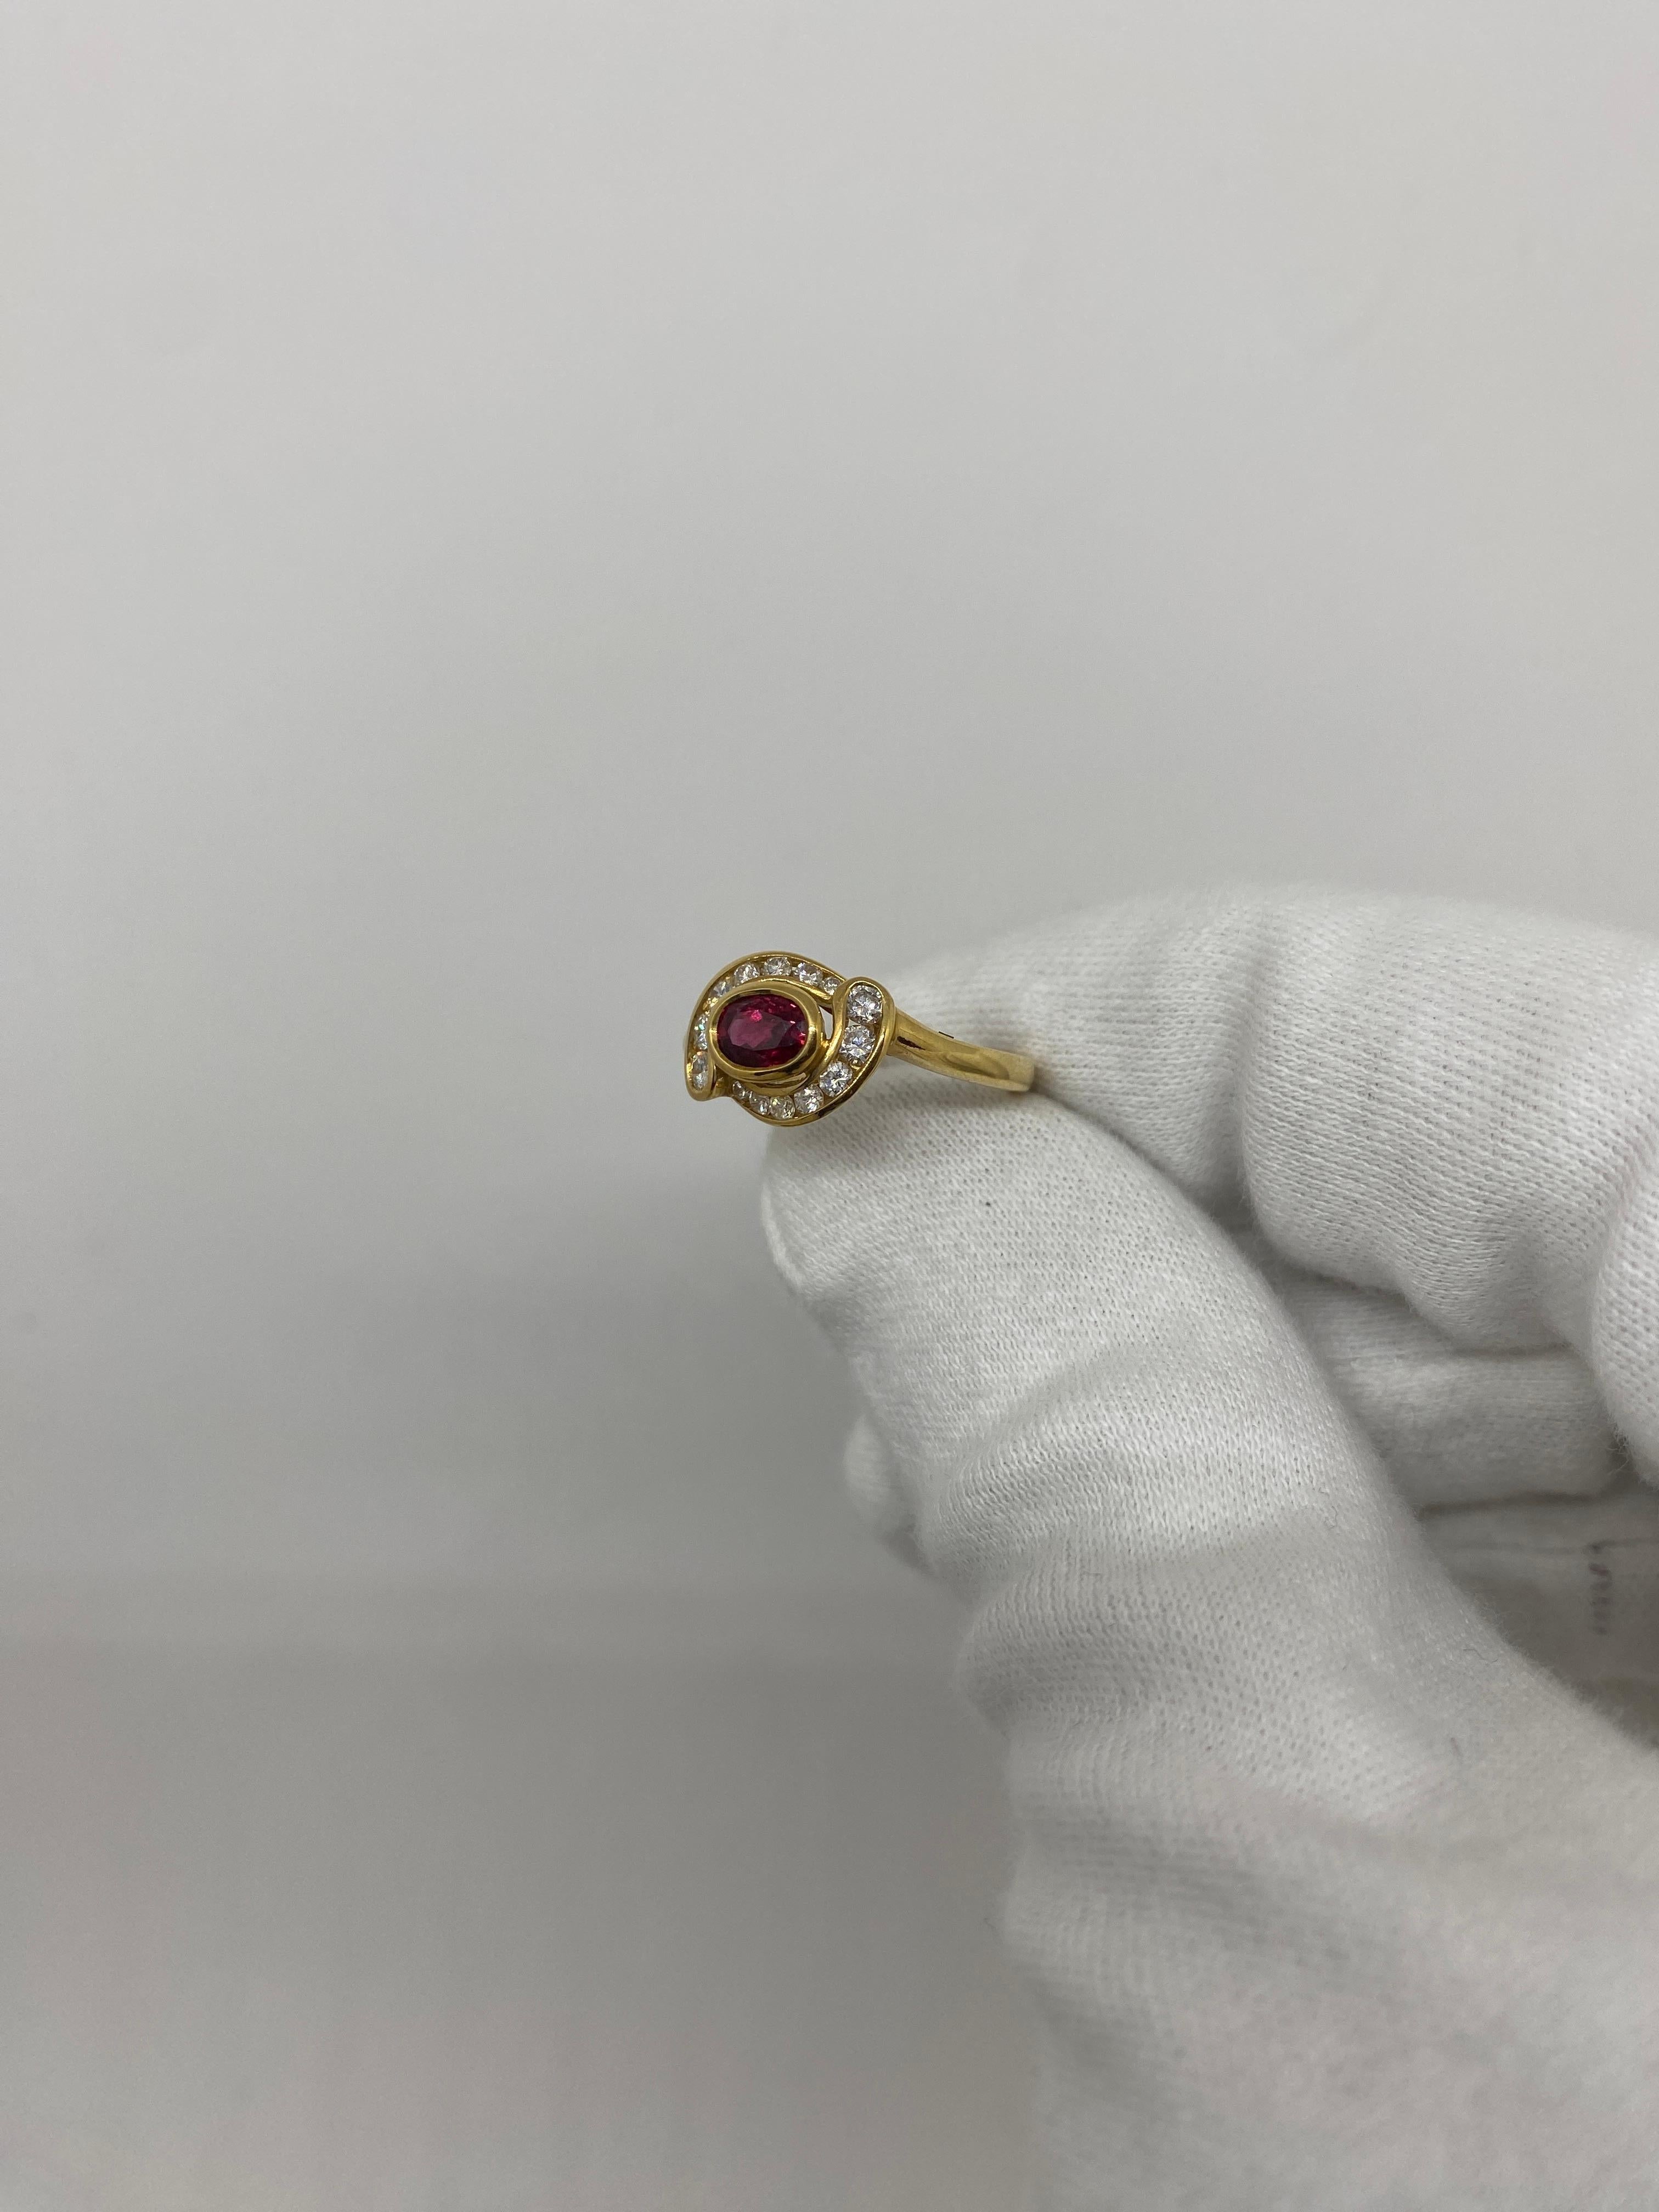 Brilliant Cut 18kt Yellow Gold Vintage Ring 0.73 Ct Ruby & 0.41 Ct White Diamonds For Sale